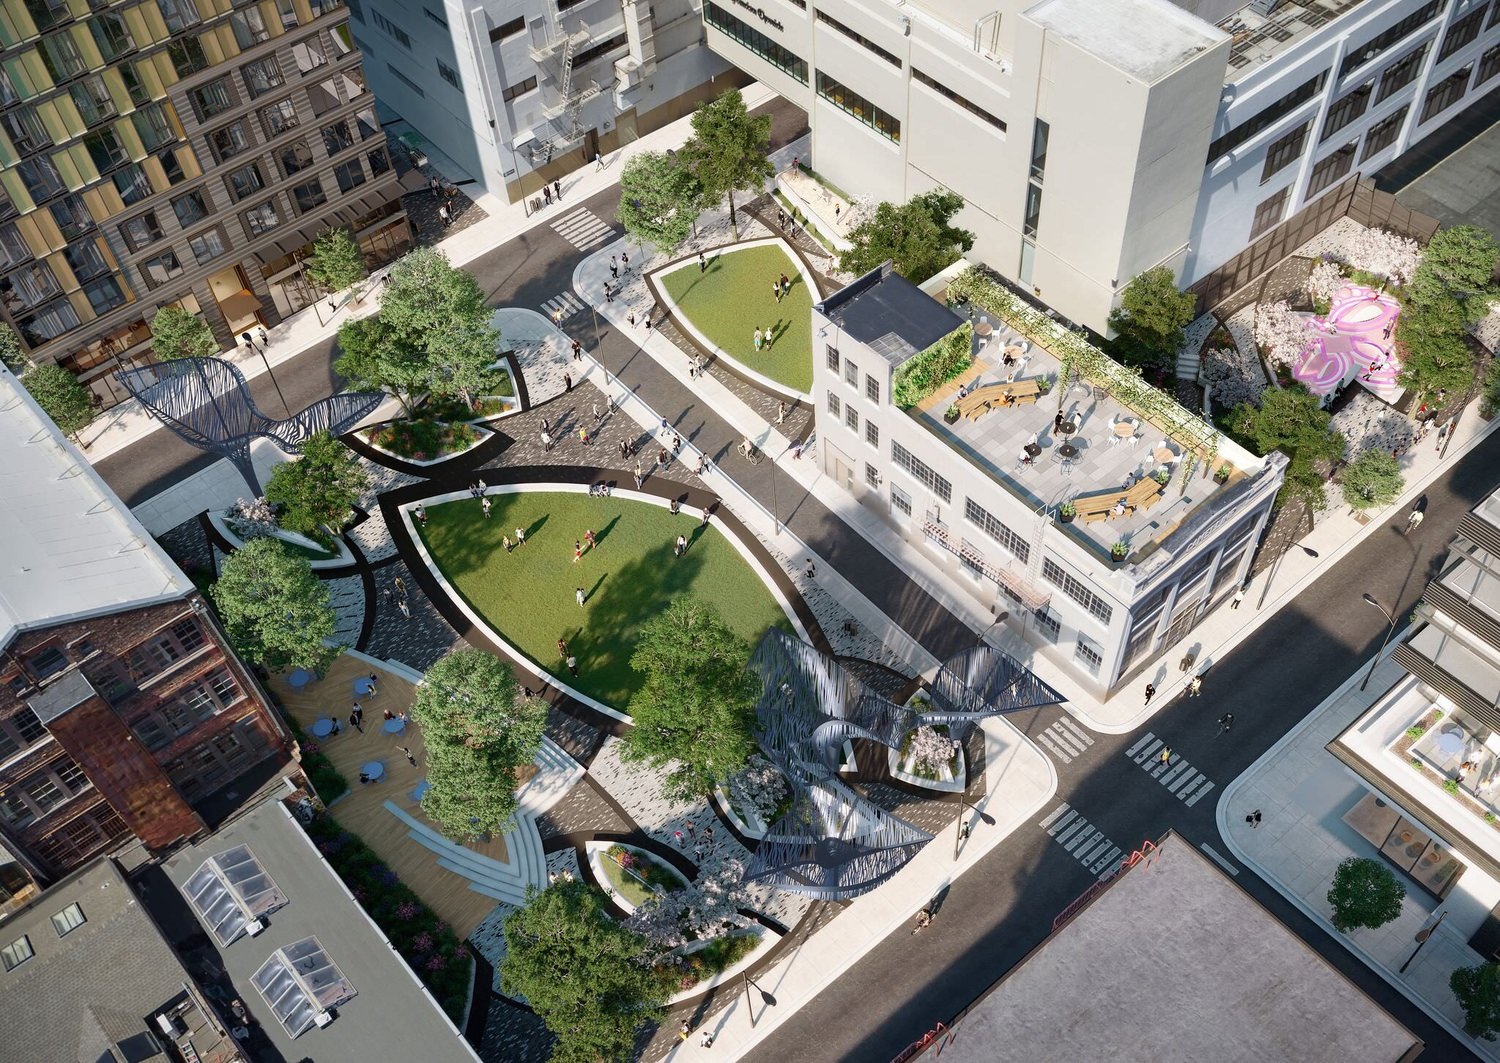 Aerial view of the property showing a rooftop seating area and a sculptural park.